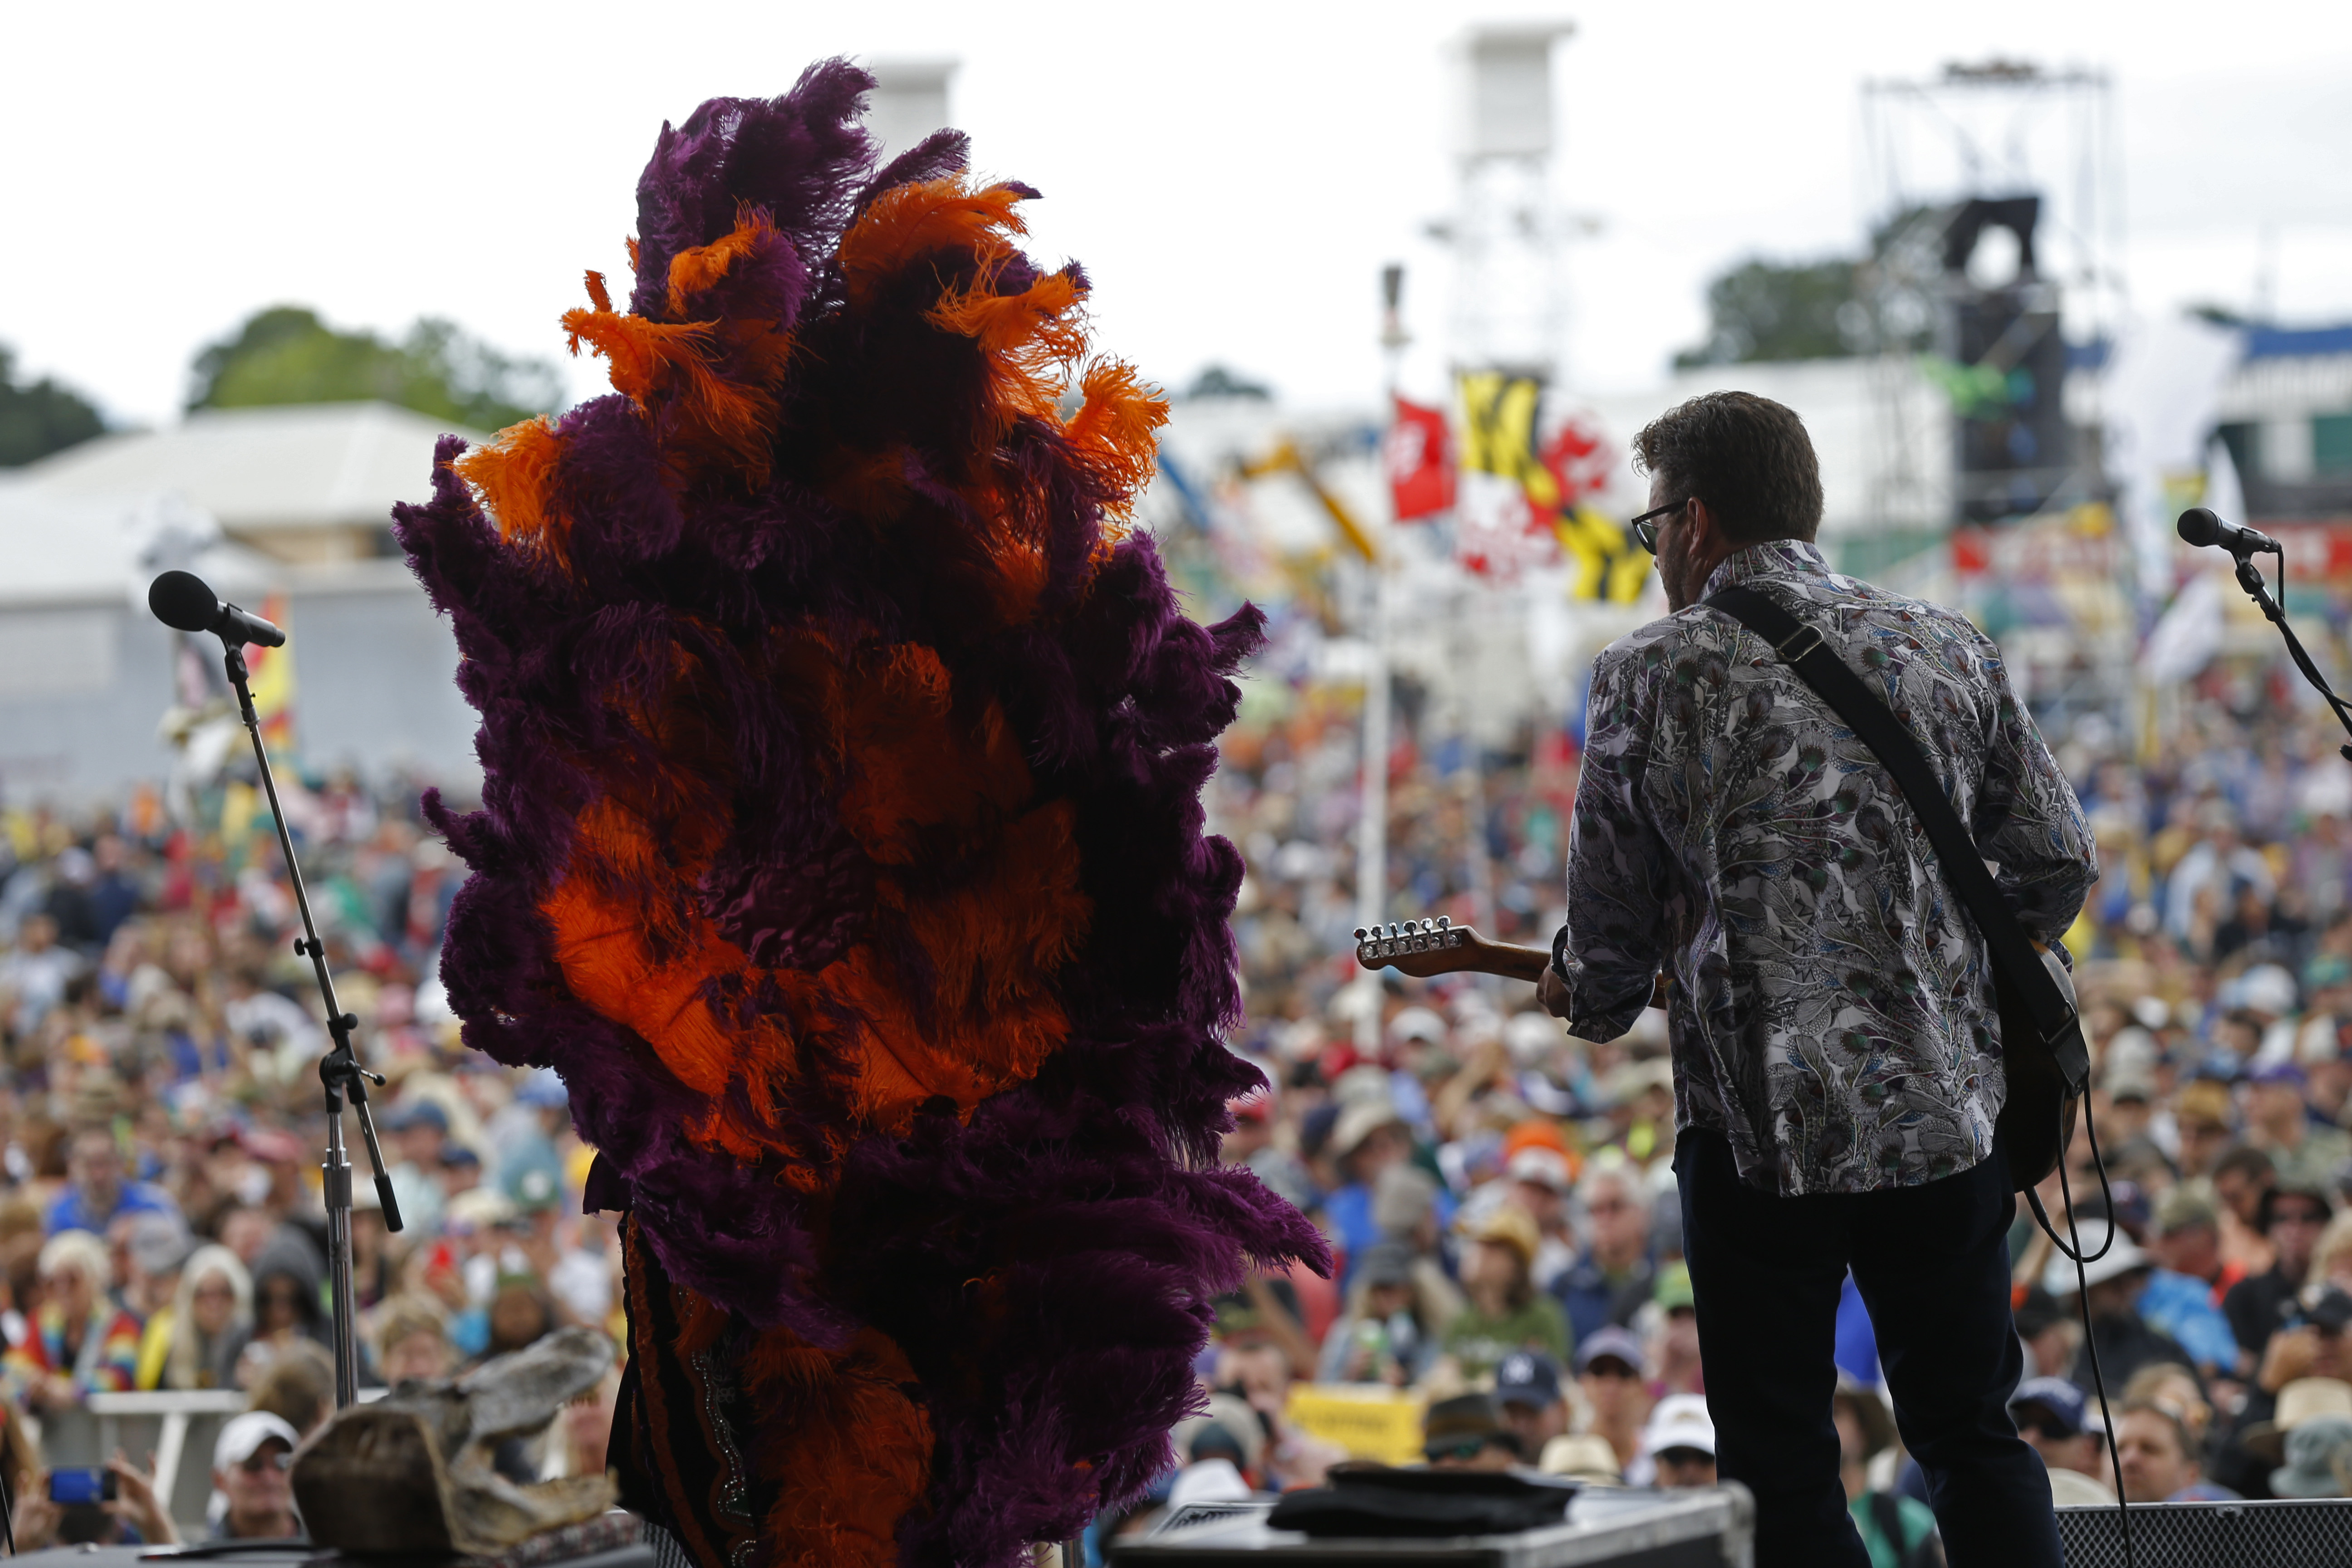 Big Chief Monk Boudreax of the Golden Eagles Mardi Gras Indian tribe, performs with the band Voice of the Wetlands All-Stars, at the New Orleans Jazz and Heritage Festival in New Orleans, Thursday, May 4, 2017. (AP Photo/Gerald Herbert)